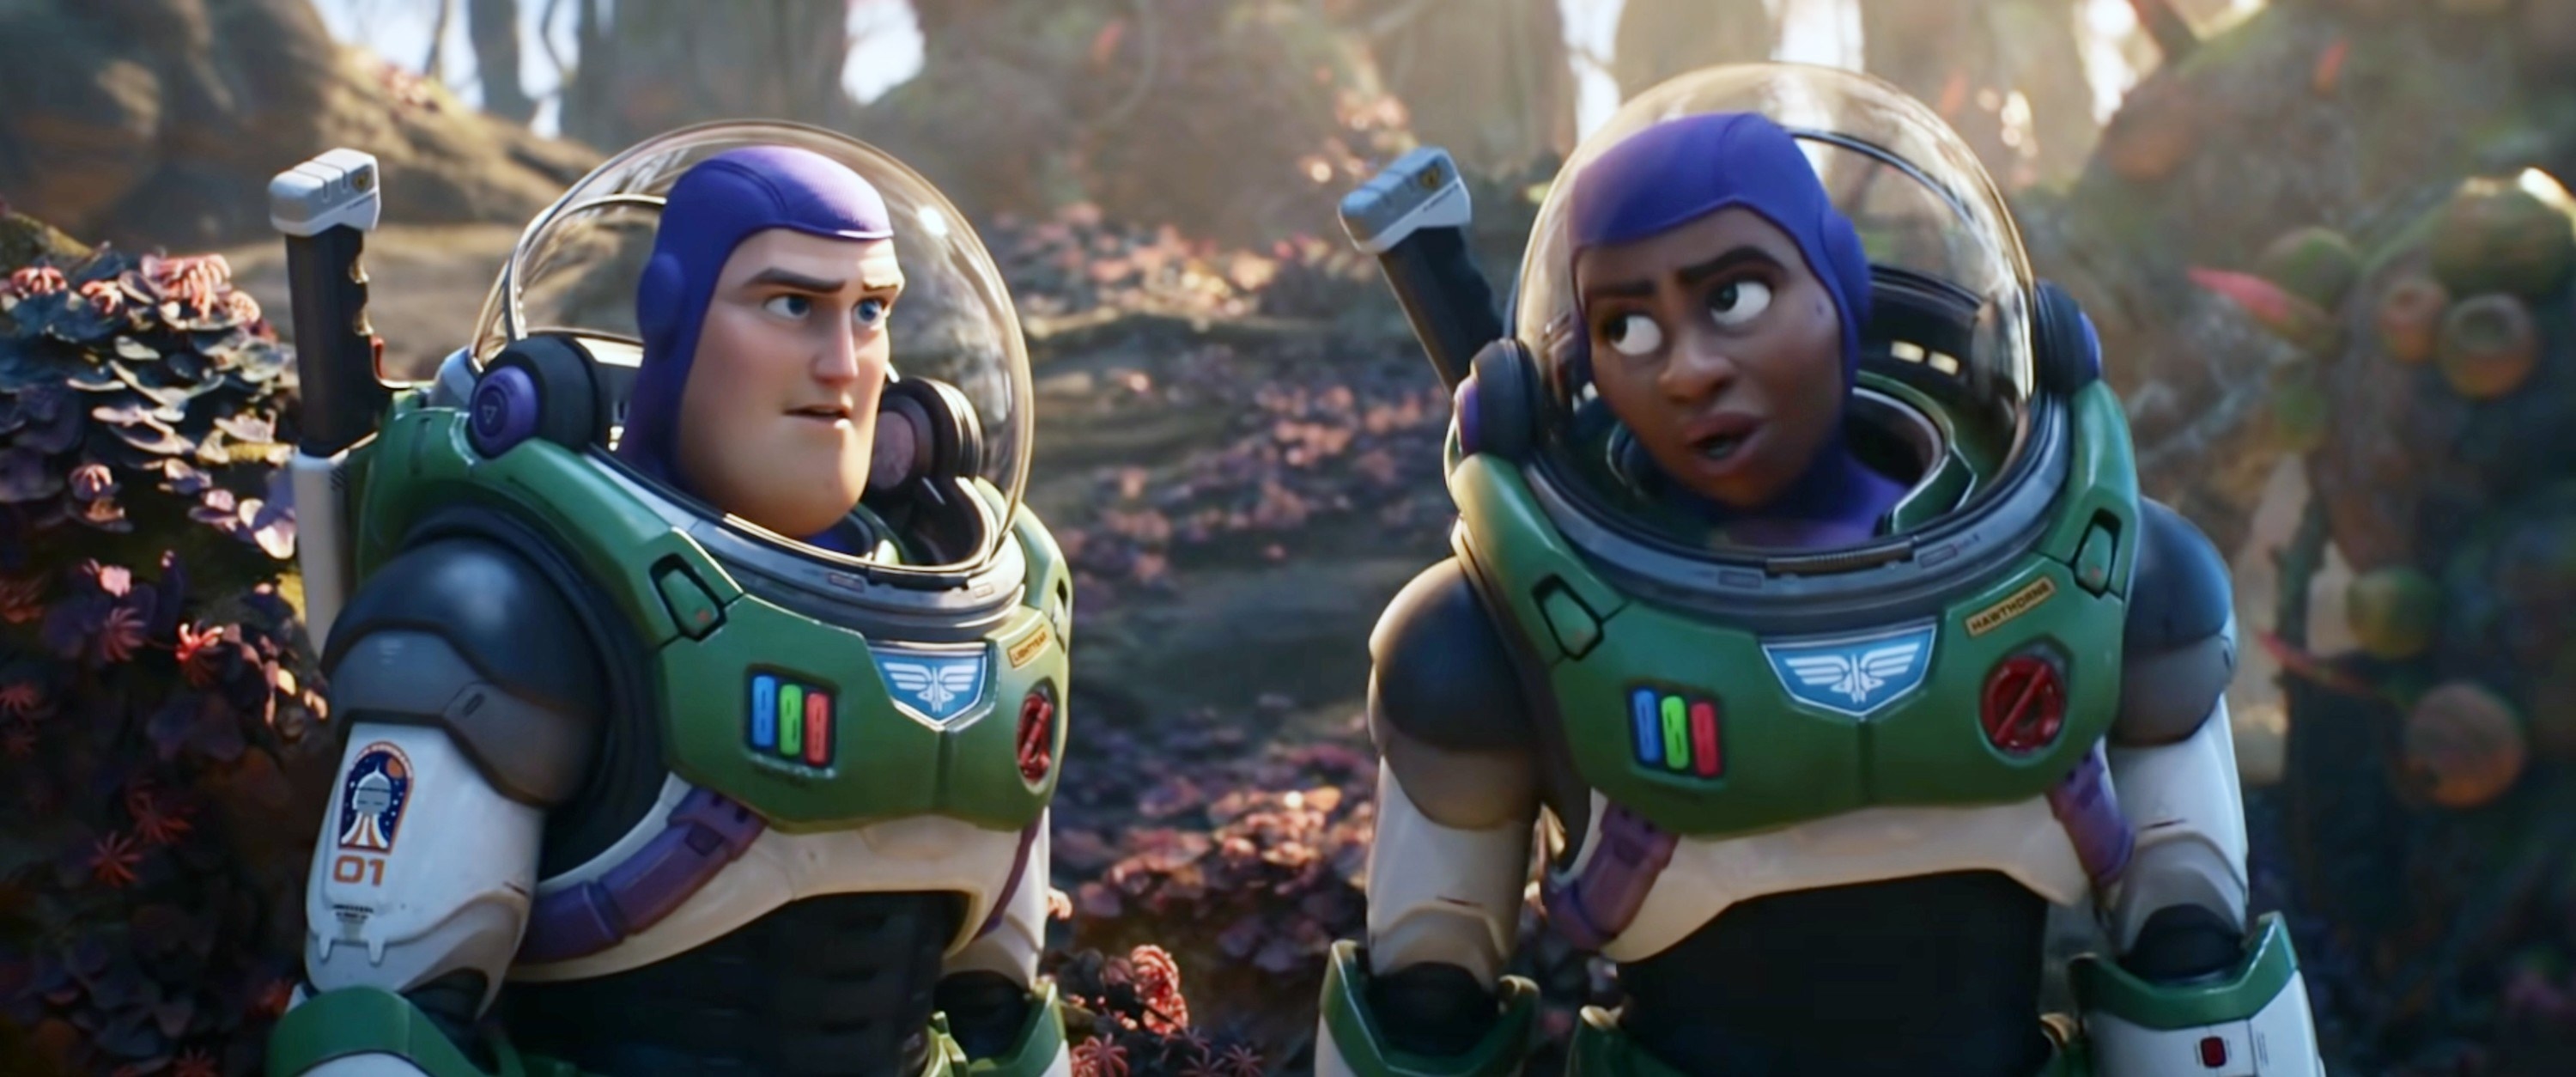 Two animated astronauts